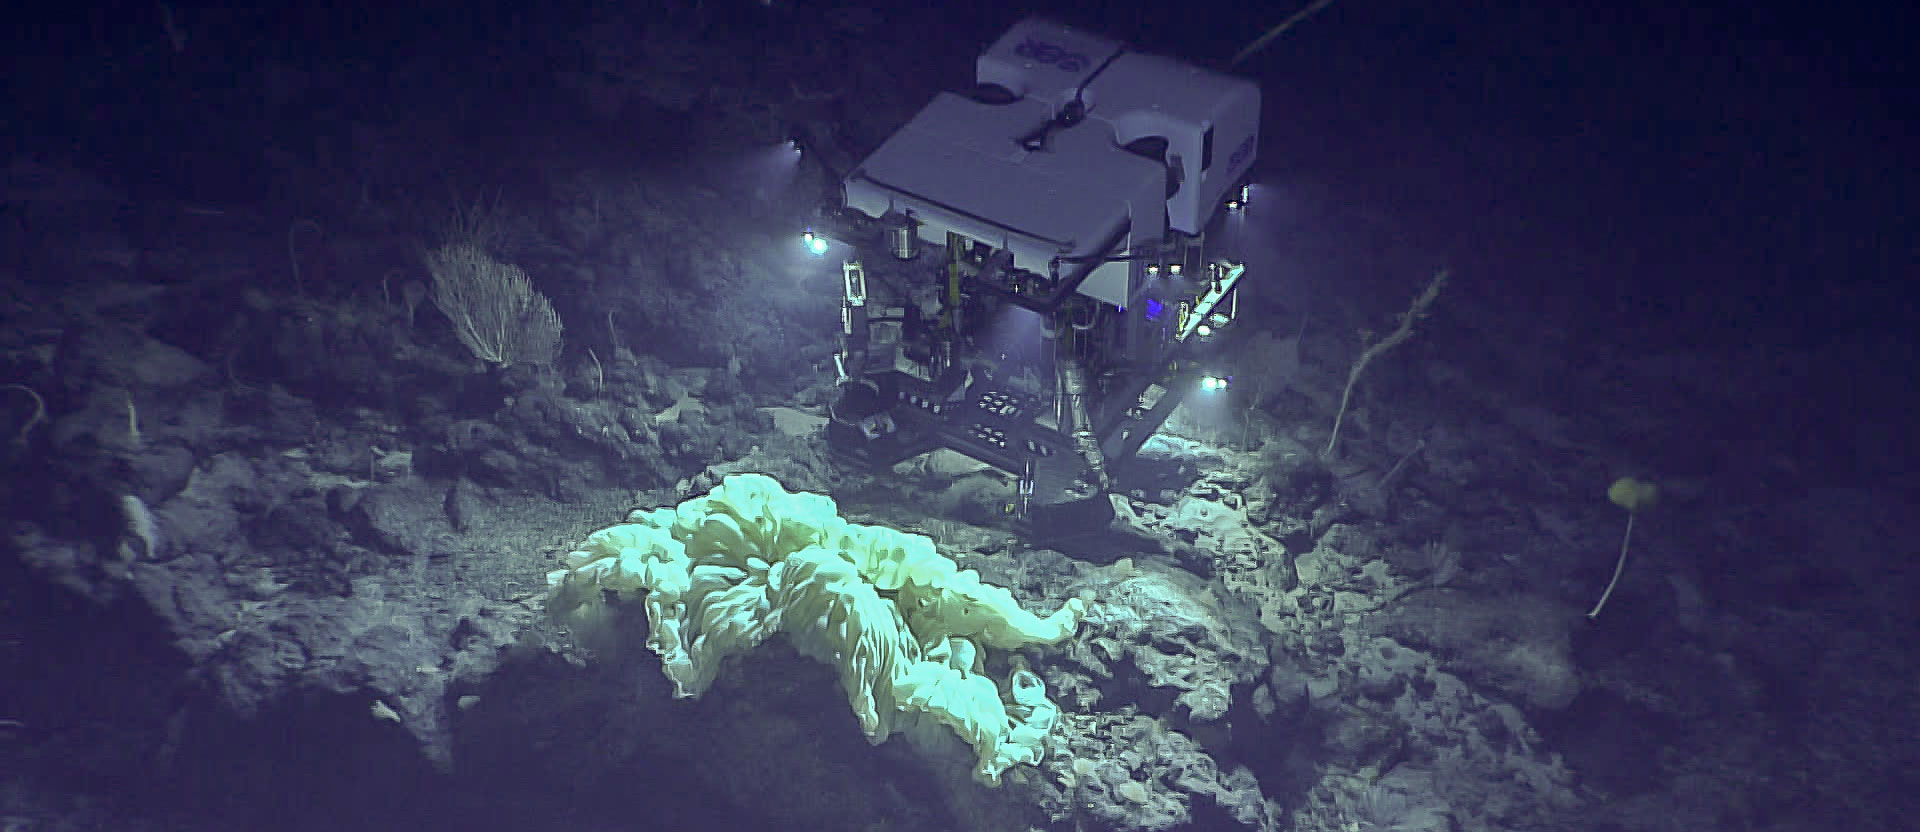 Remotely operated vehicle hovering over rocks and corals